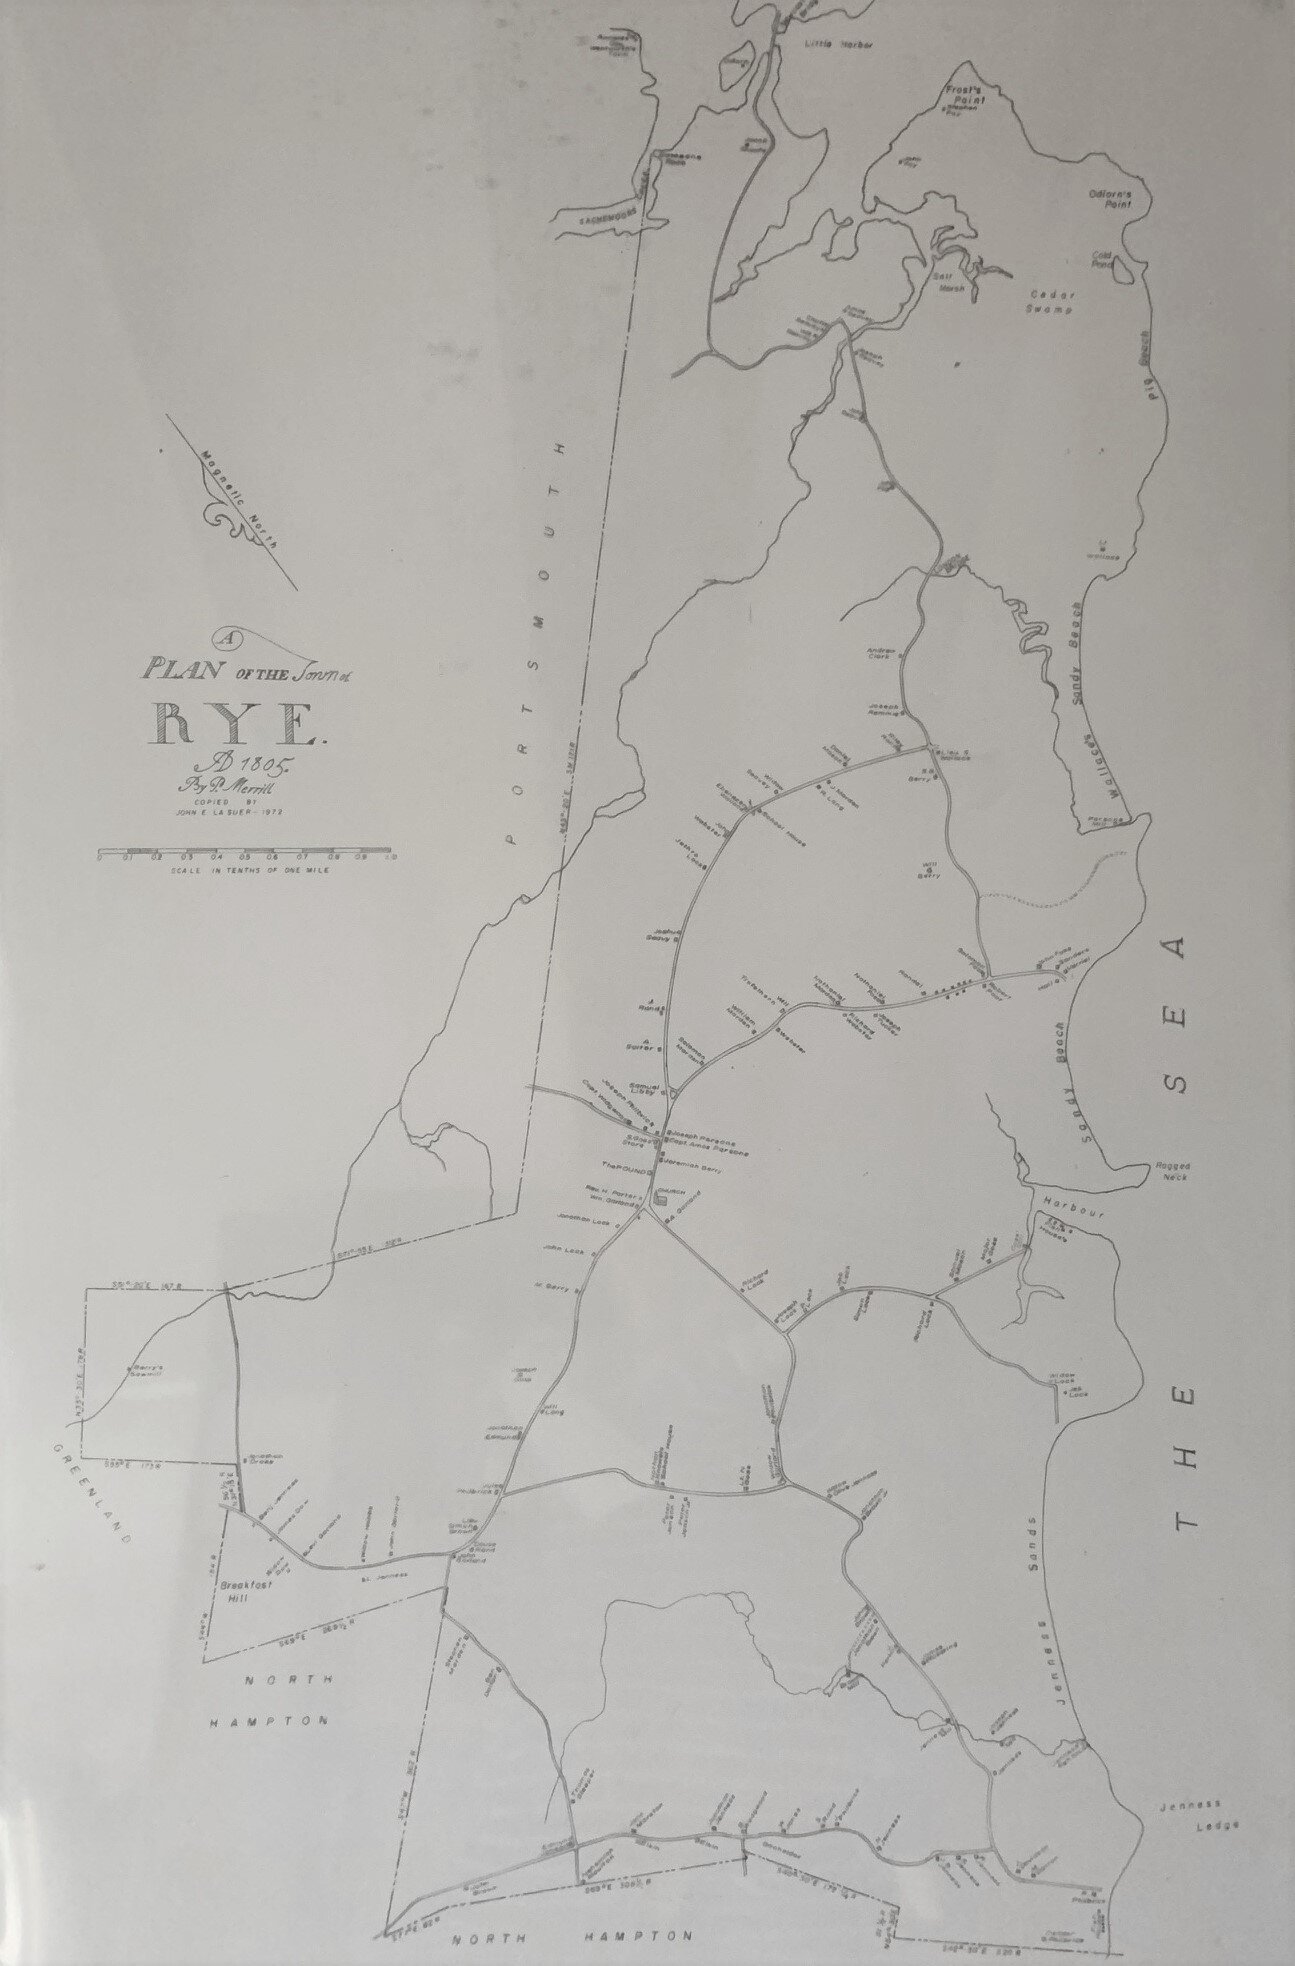 Phineas Merrill's 1805 Map of Rye, NH